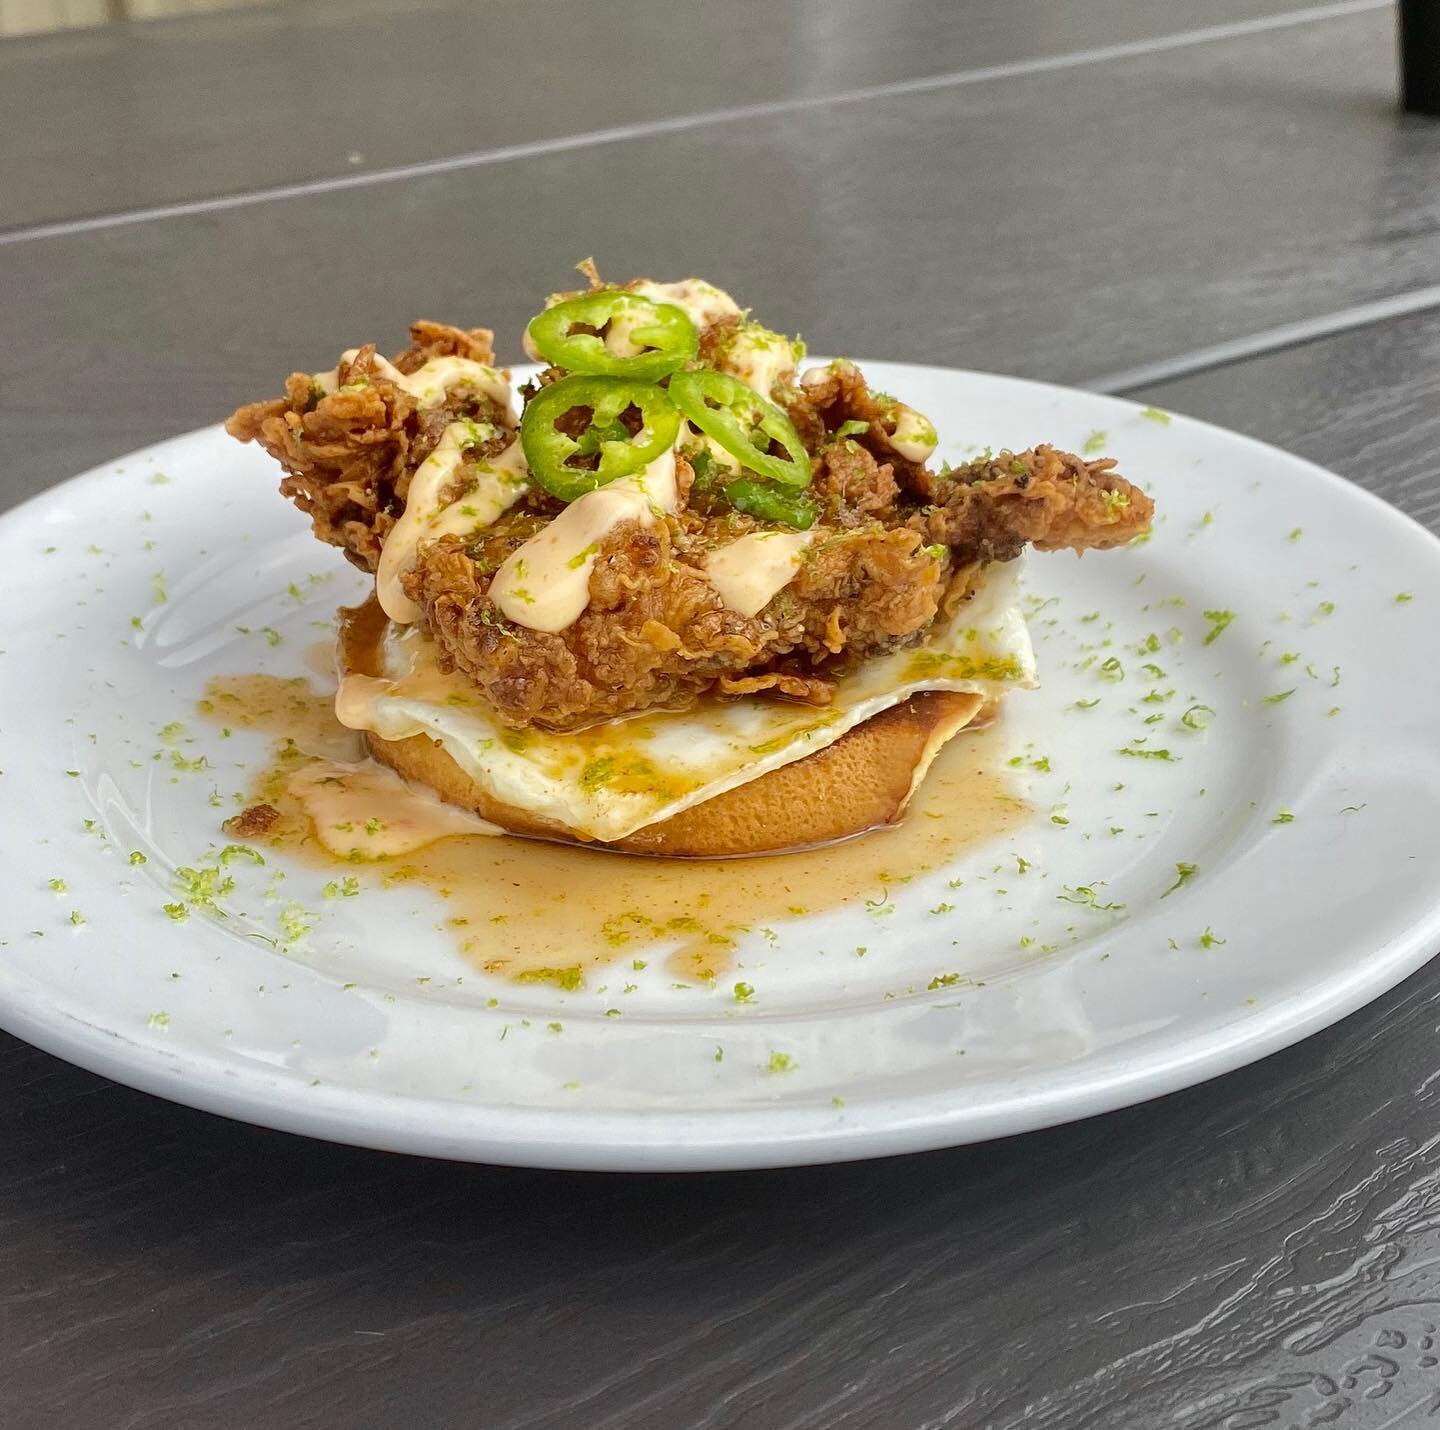 Threw together a little breakfast for the BOH BH brewery crew this am with a few of the items we had in the kitchen. 🤔

Buttermilk fried chicken smothered in jalape&ntilde;o and lime maple syrup, a drizzle of Nashville aioli, and garnished with fres